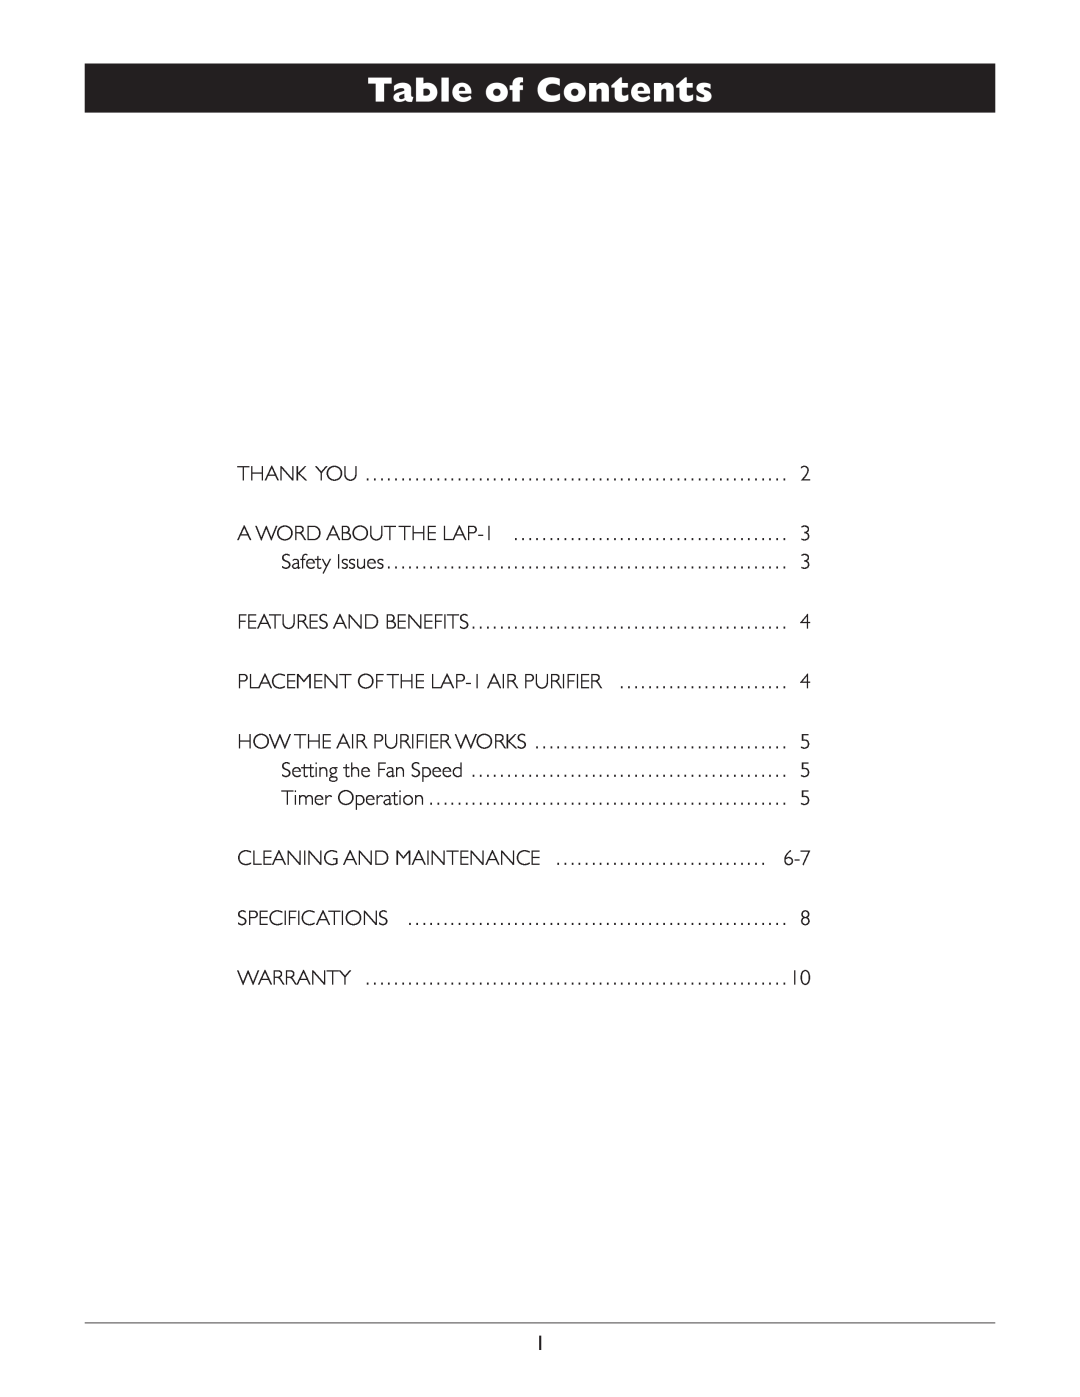 Amcor LAP-1 owner manual Table of Contents 